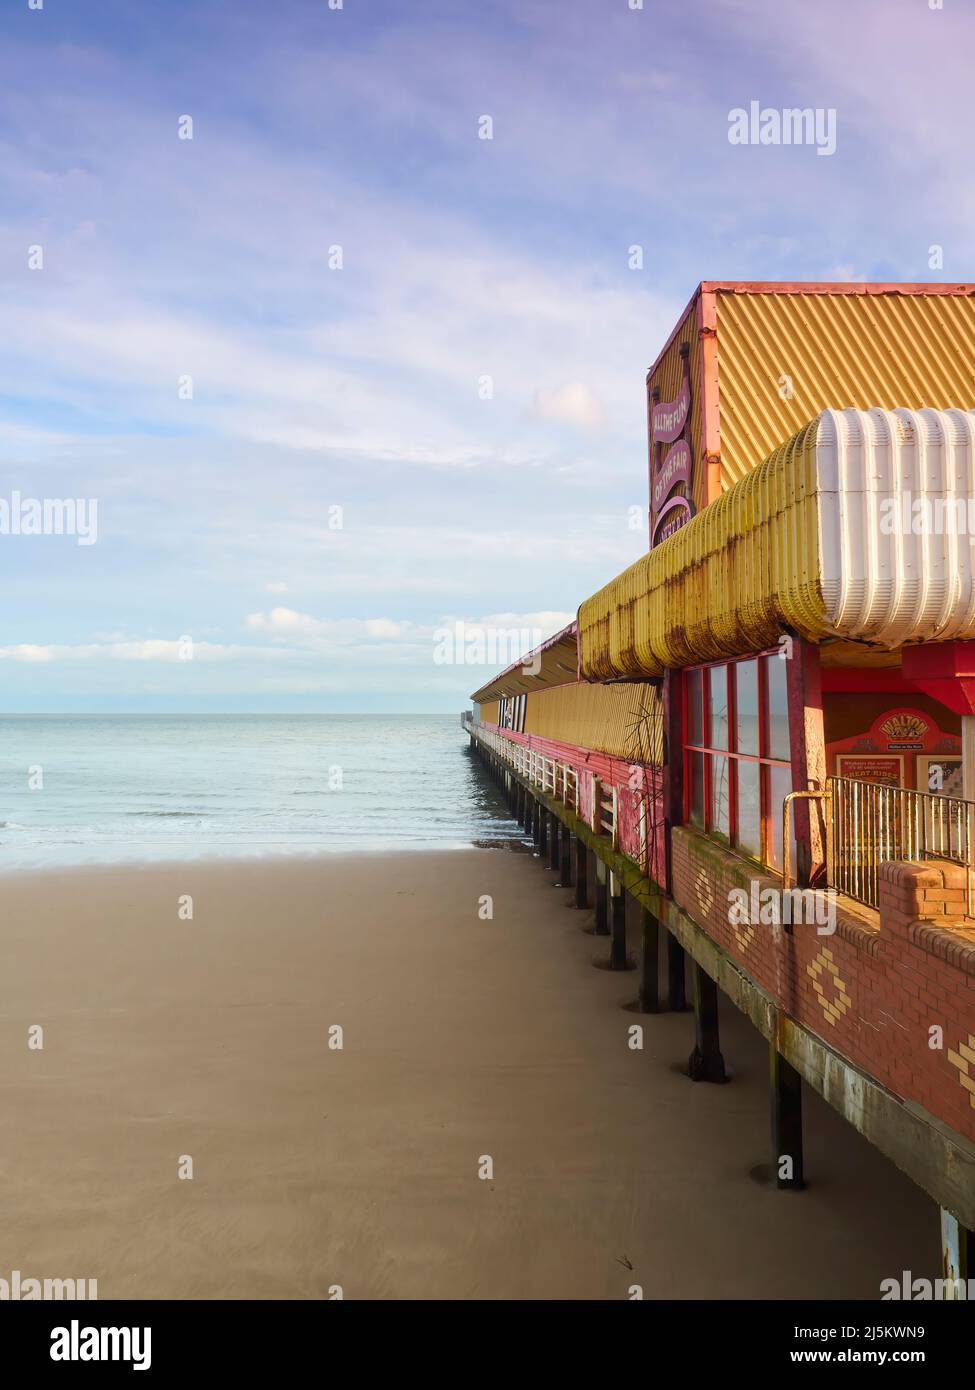 A fun fair complex on a pier, extending out into the sea at Frinton. Soft sunlight and wispy clouds give a wistful, nostalgic feel. Stock Photo